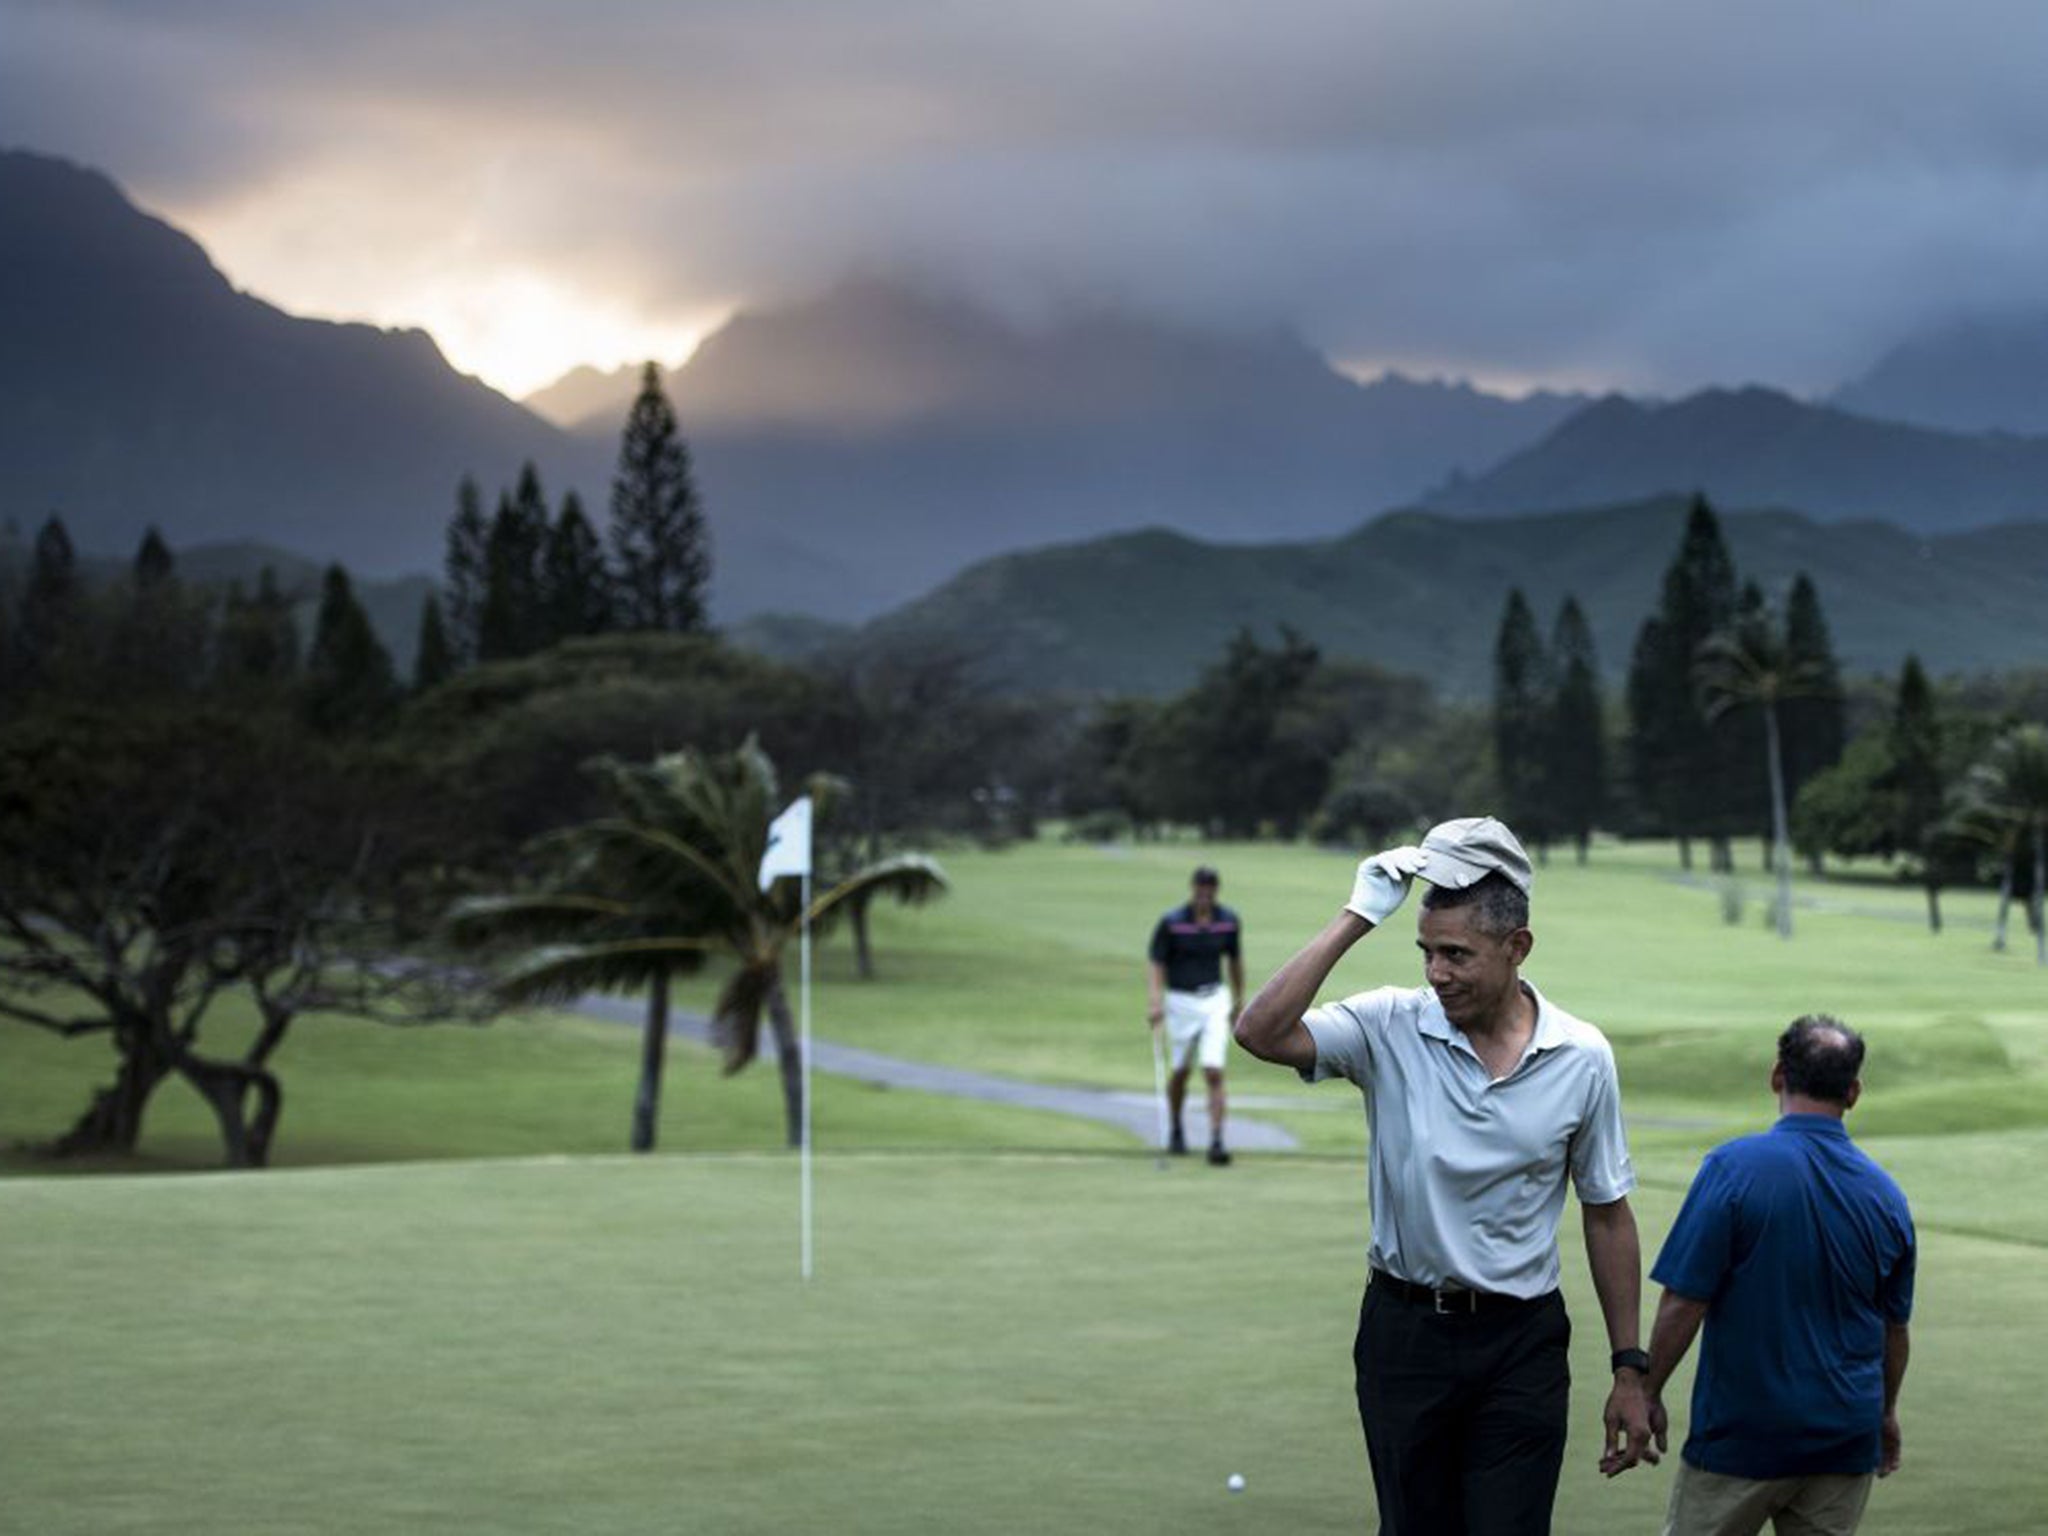 Obama relaxes on the golf course in Kailua last week. For US presidents, Hawaii is as exotic as it gets